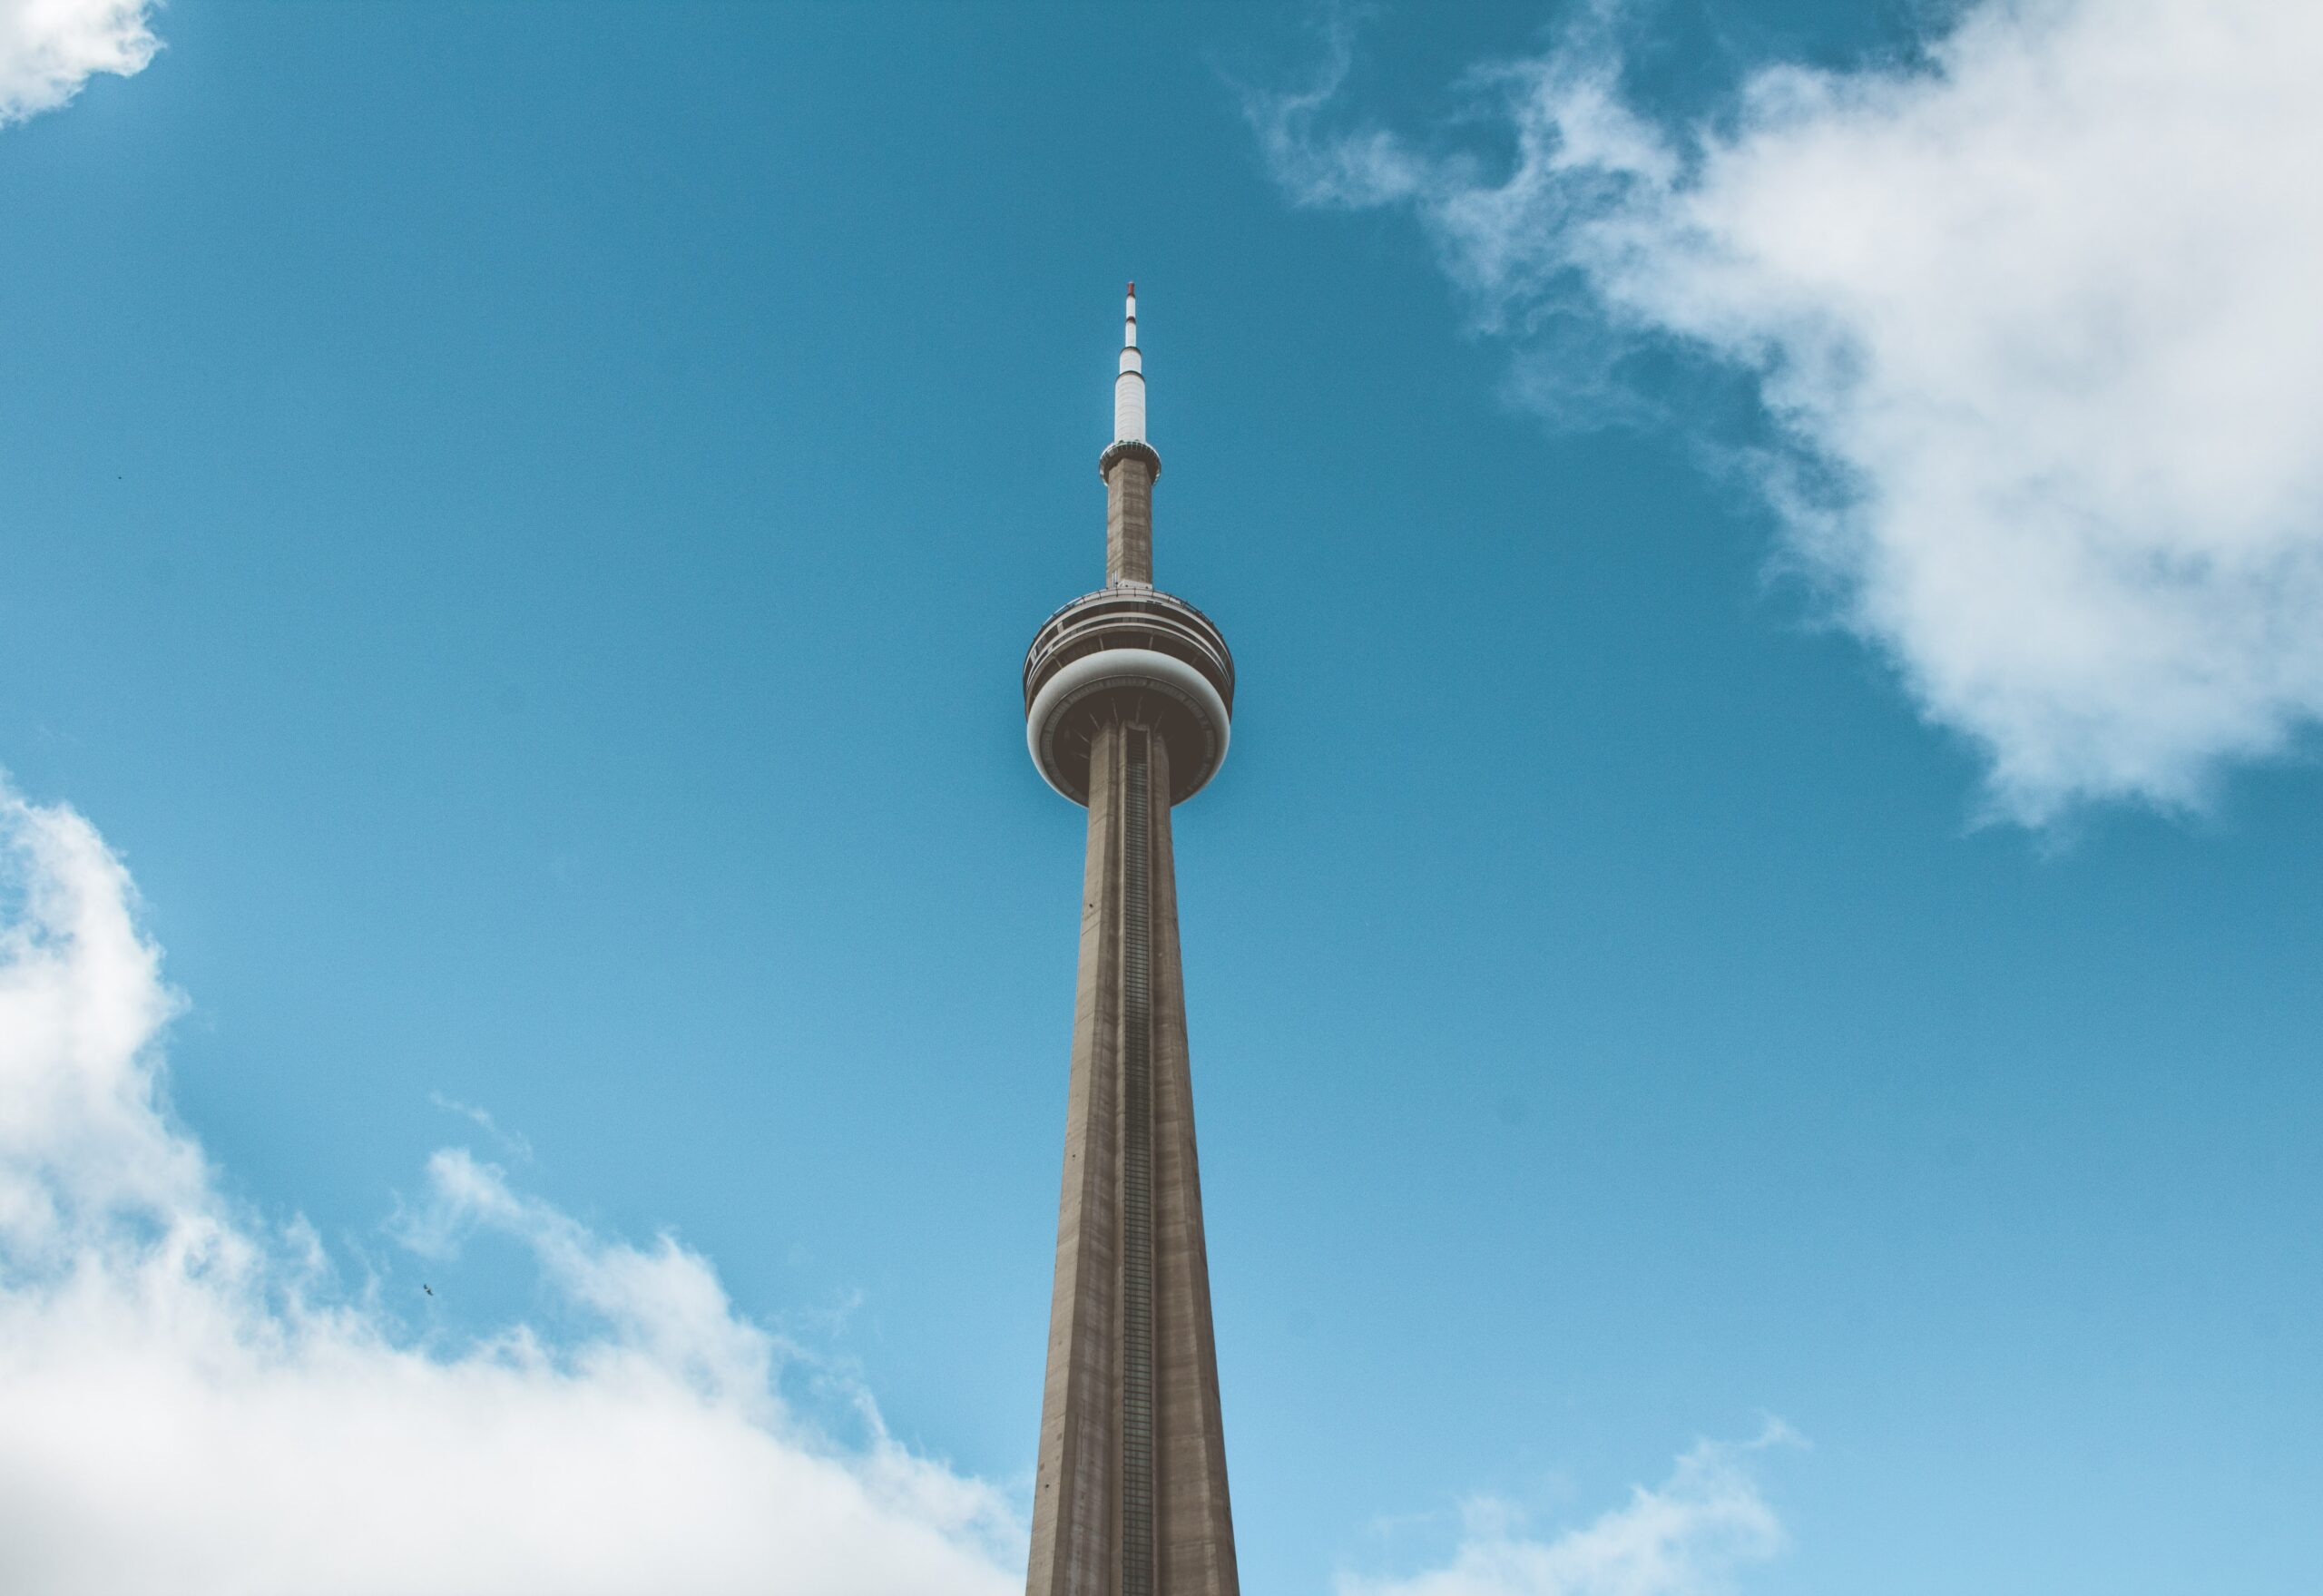 The CN Tower stands alone against a blue sky